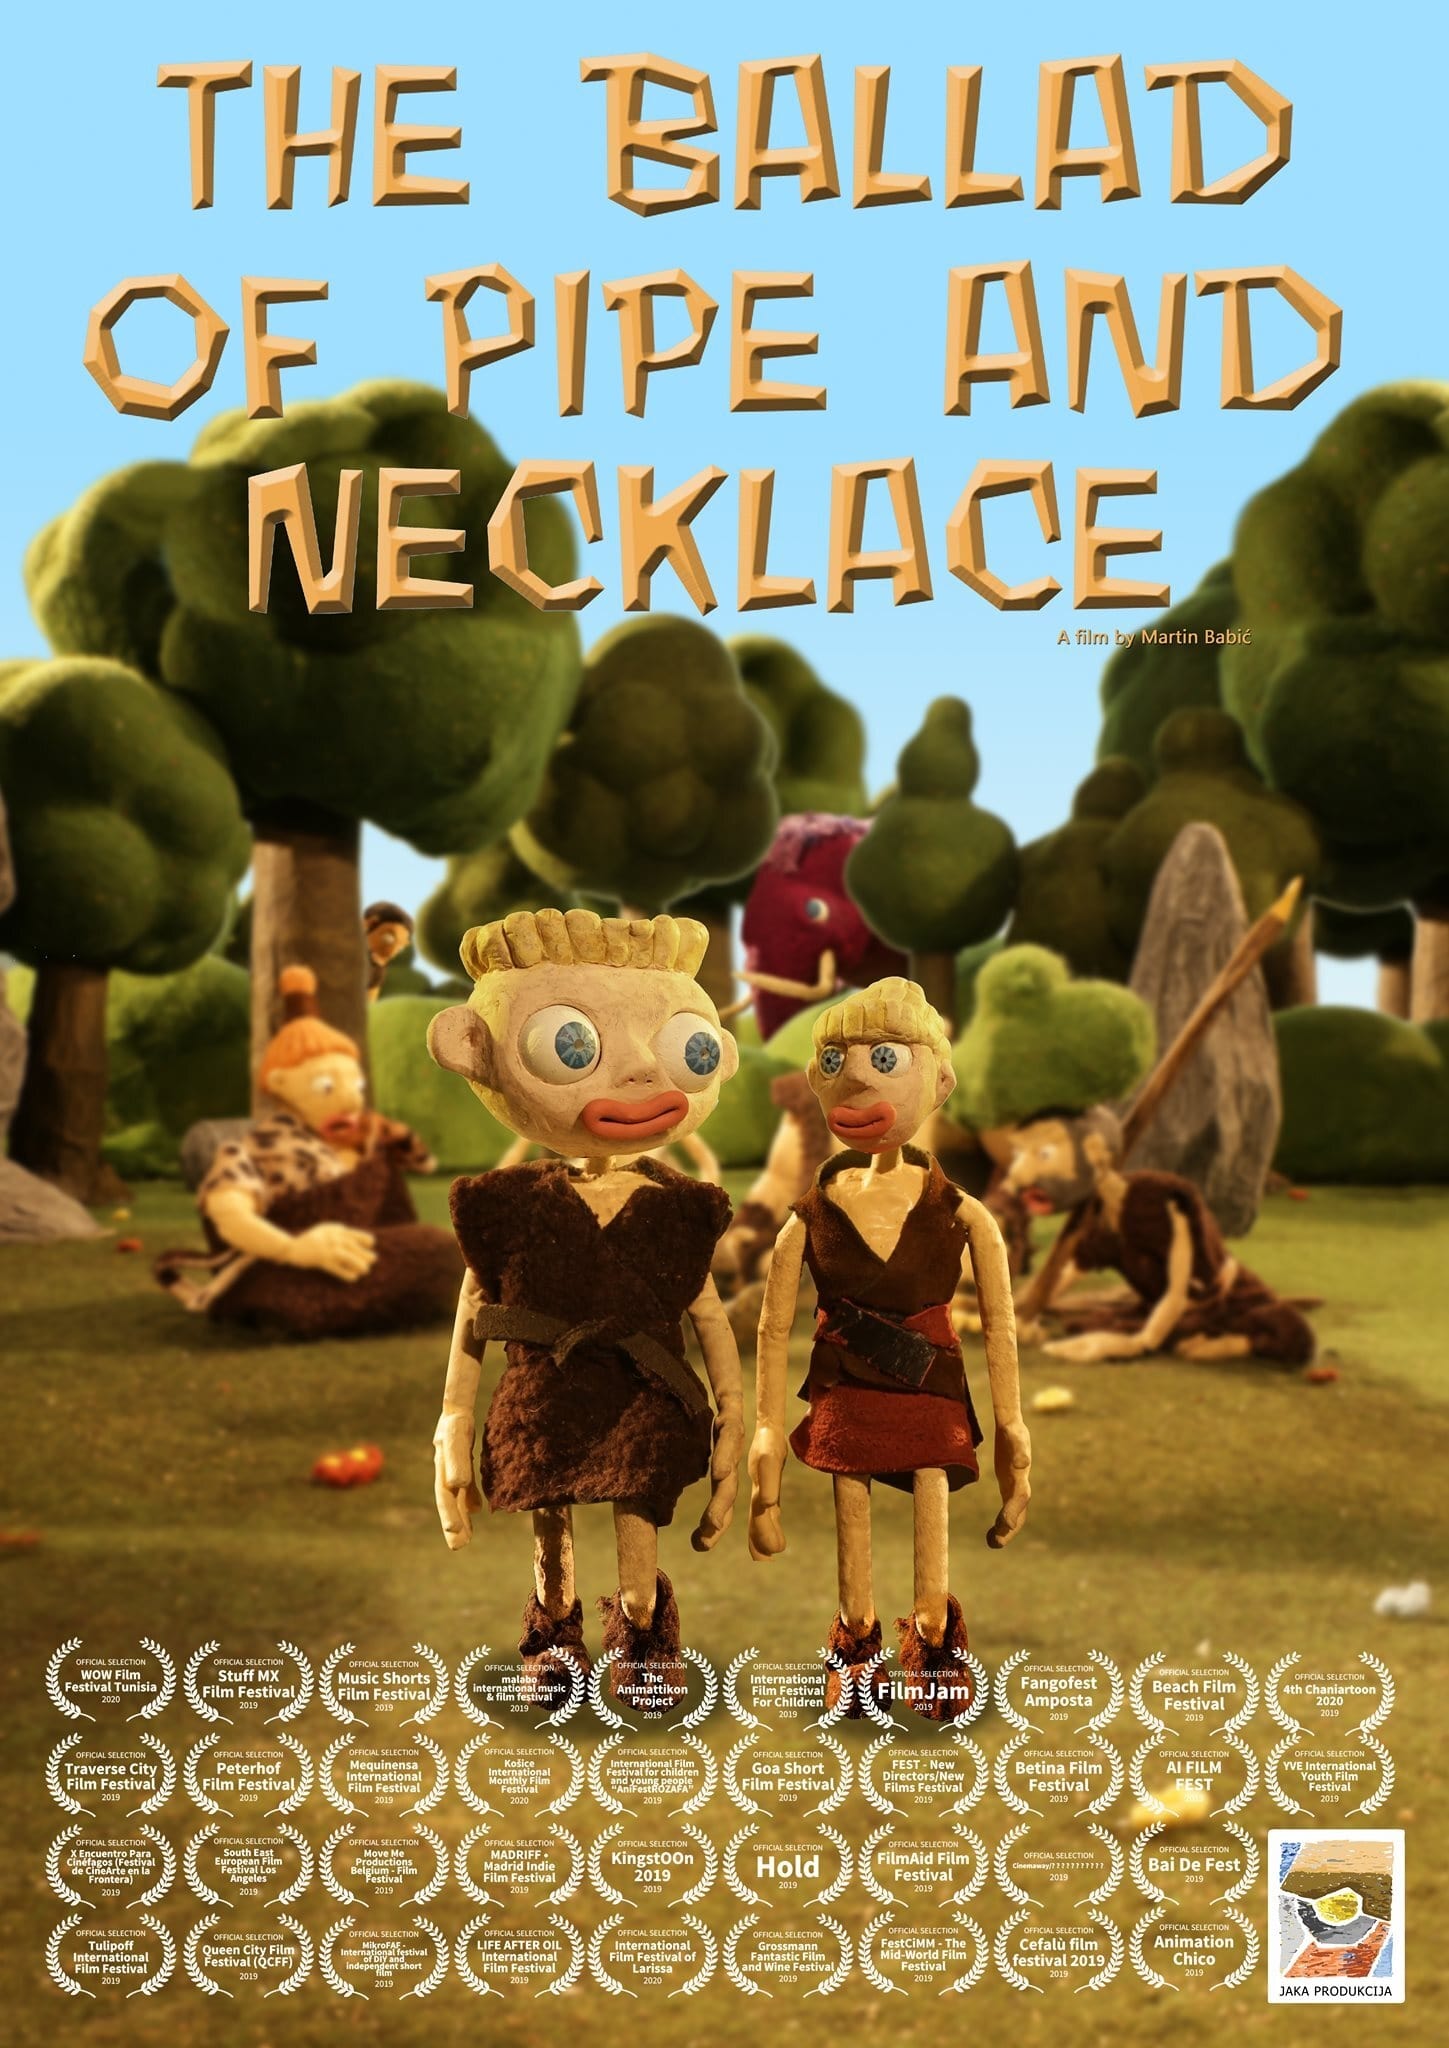 Ballad of pipe and necklace